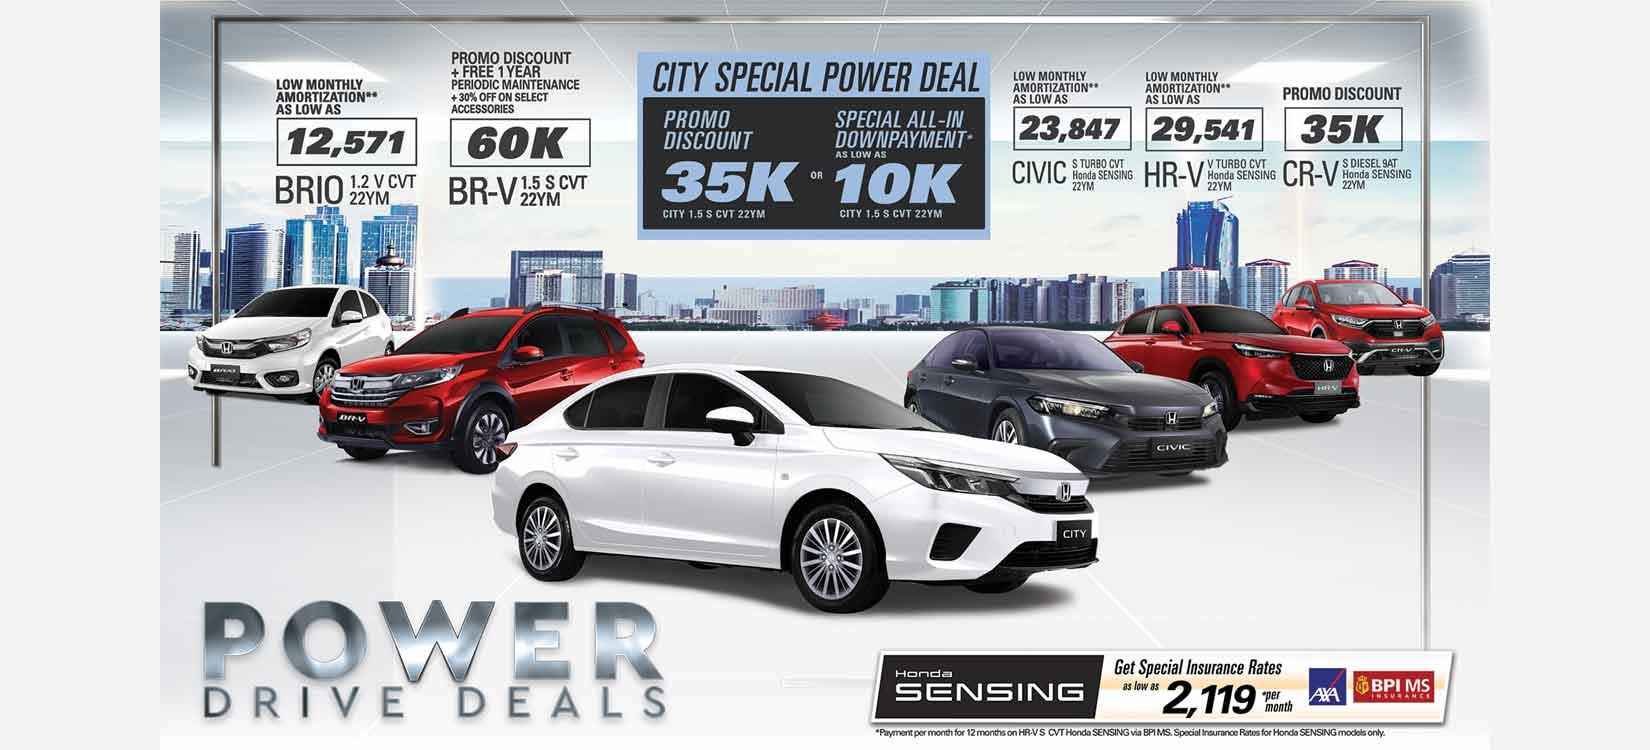 Rain with excitement this June as Honda extends BR-V promos and launches ‘Power Drive Deals’ for select models